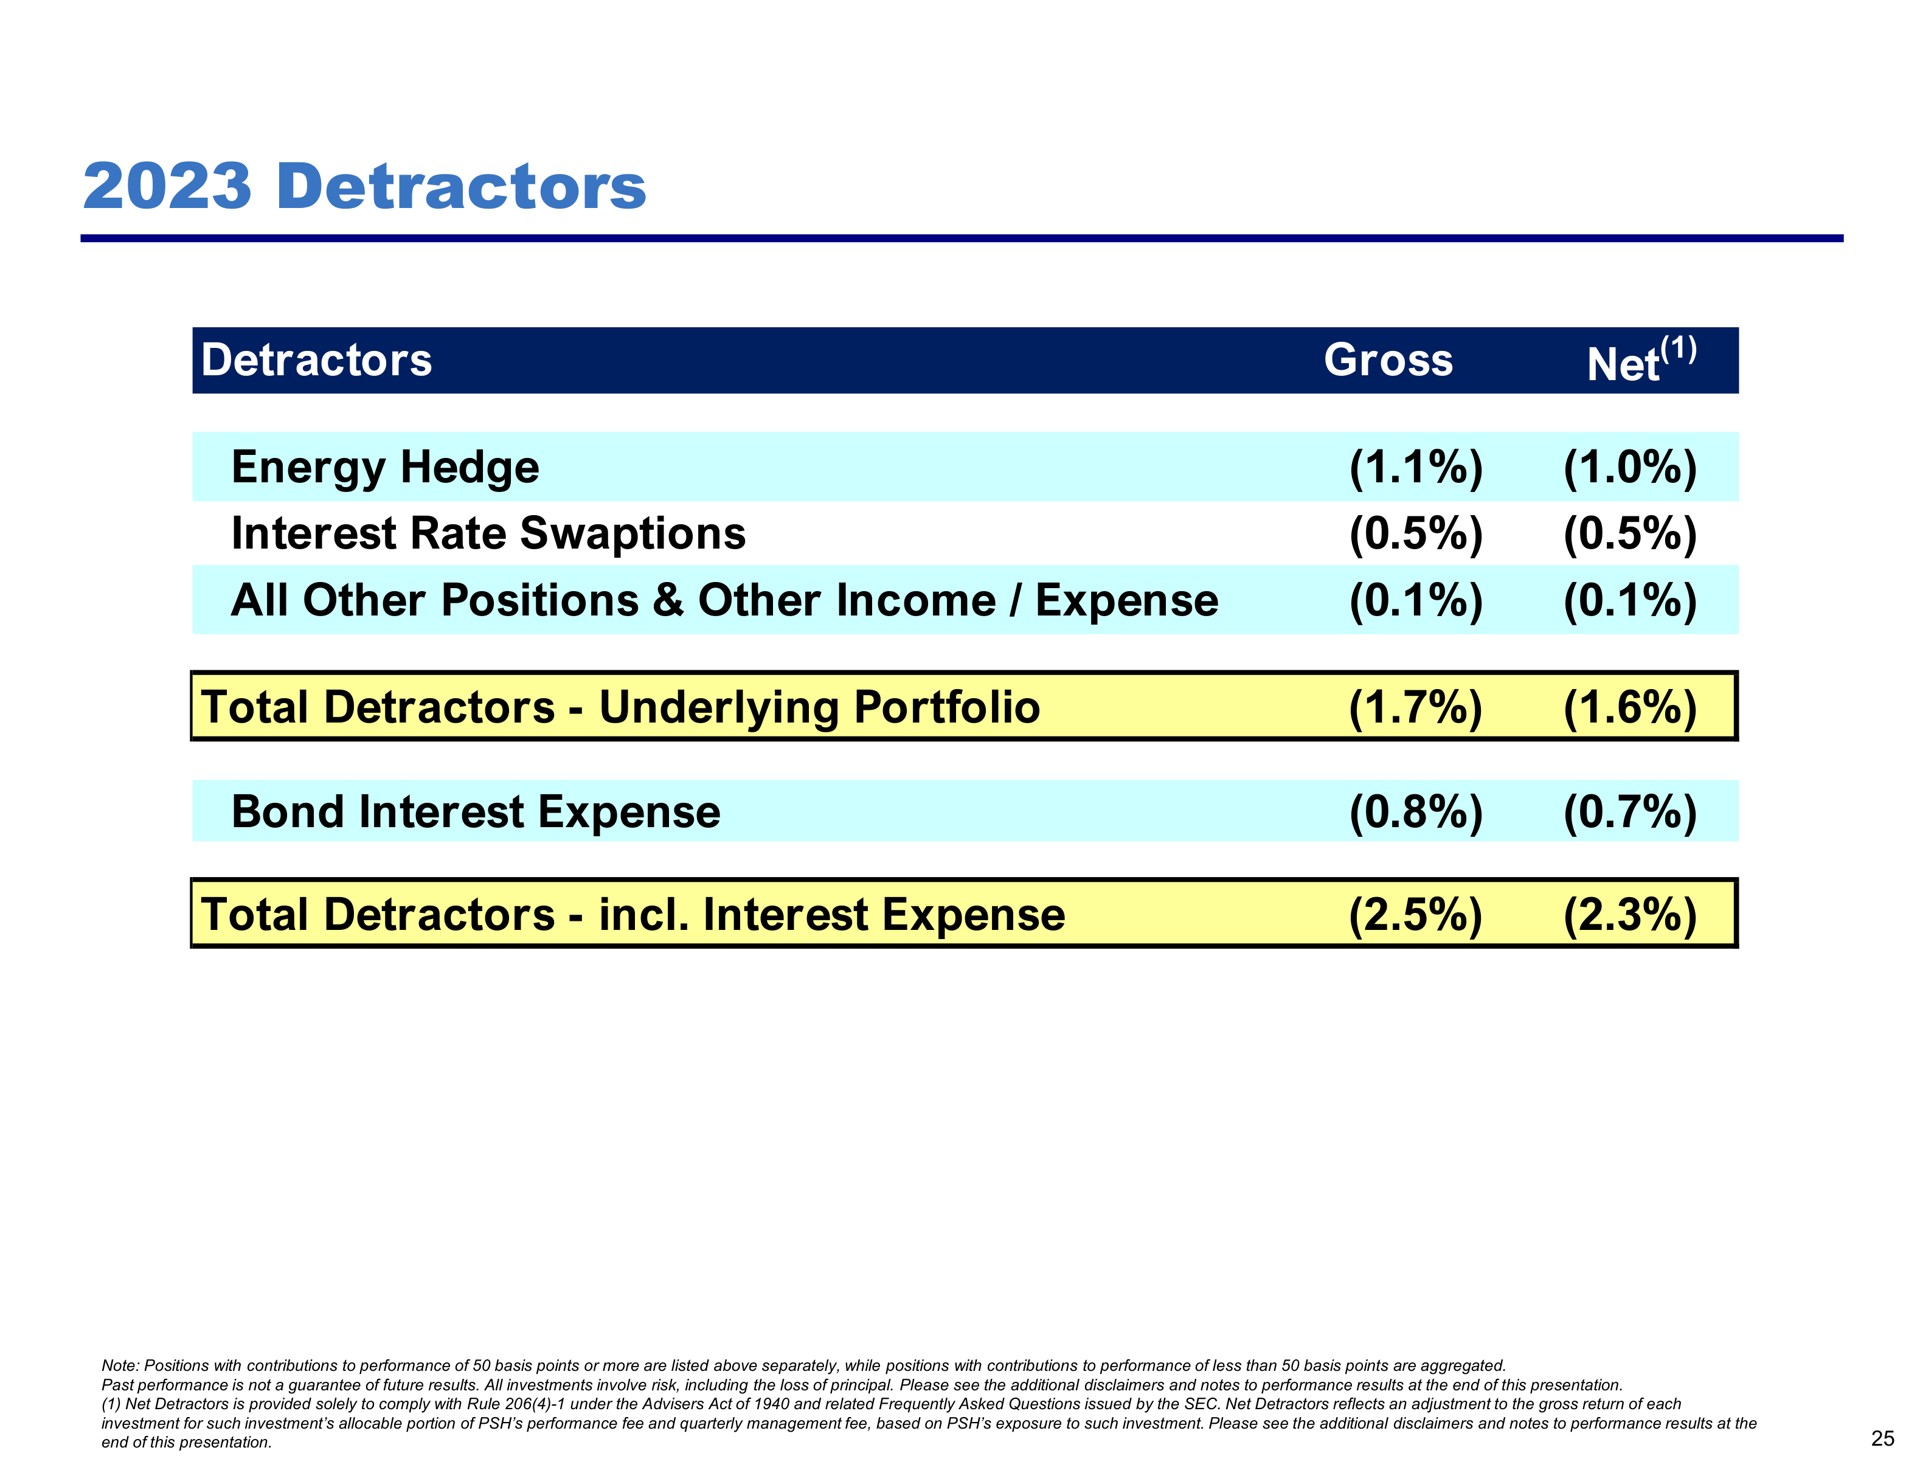 detractors detractors gross energy hedge interest rate all other positions other income expense total detractors underlying portfolio bond interest expense total detractors interest expense net | Pershing Square